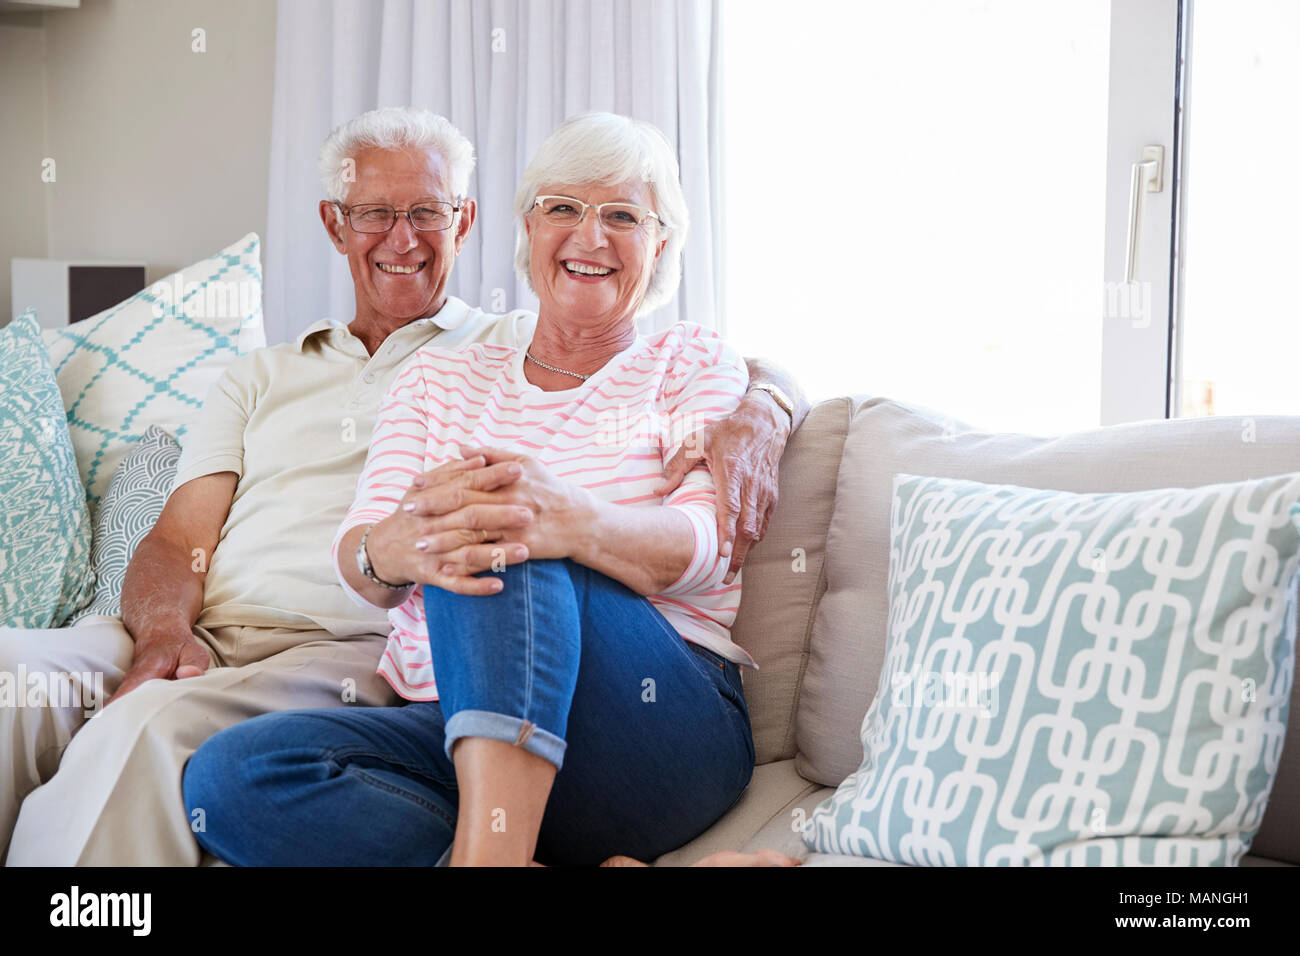 Portrait Of Senior Couple Relaxing On Sofa At Home Together Stock Photo